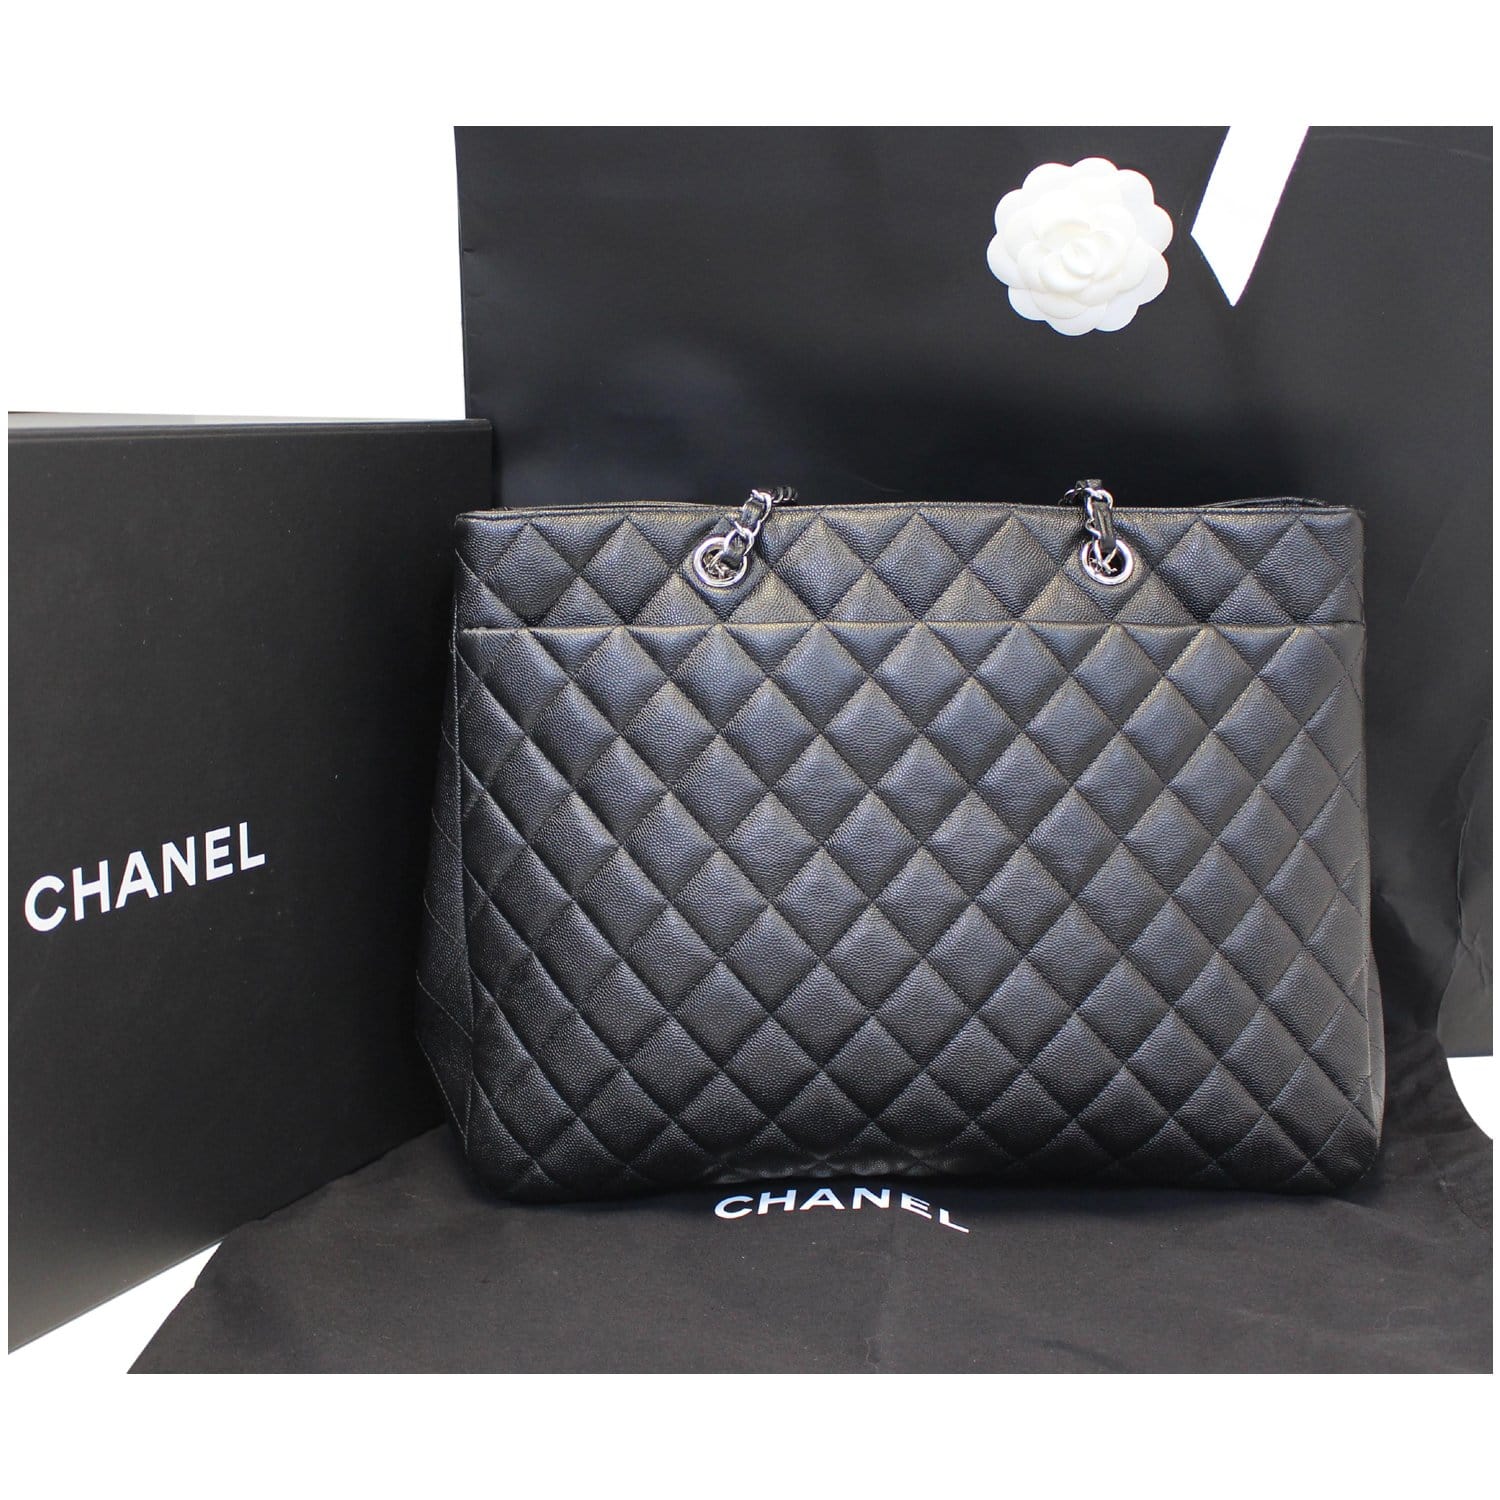 A WHITE CAVIAR LEATHER MEDIUM DOUBLE FLAP BAG WITH SILVER HARDWARE CHANEL  20052006  Christies